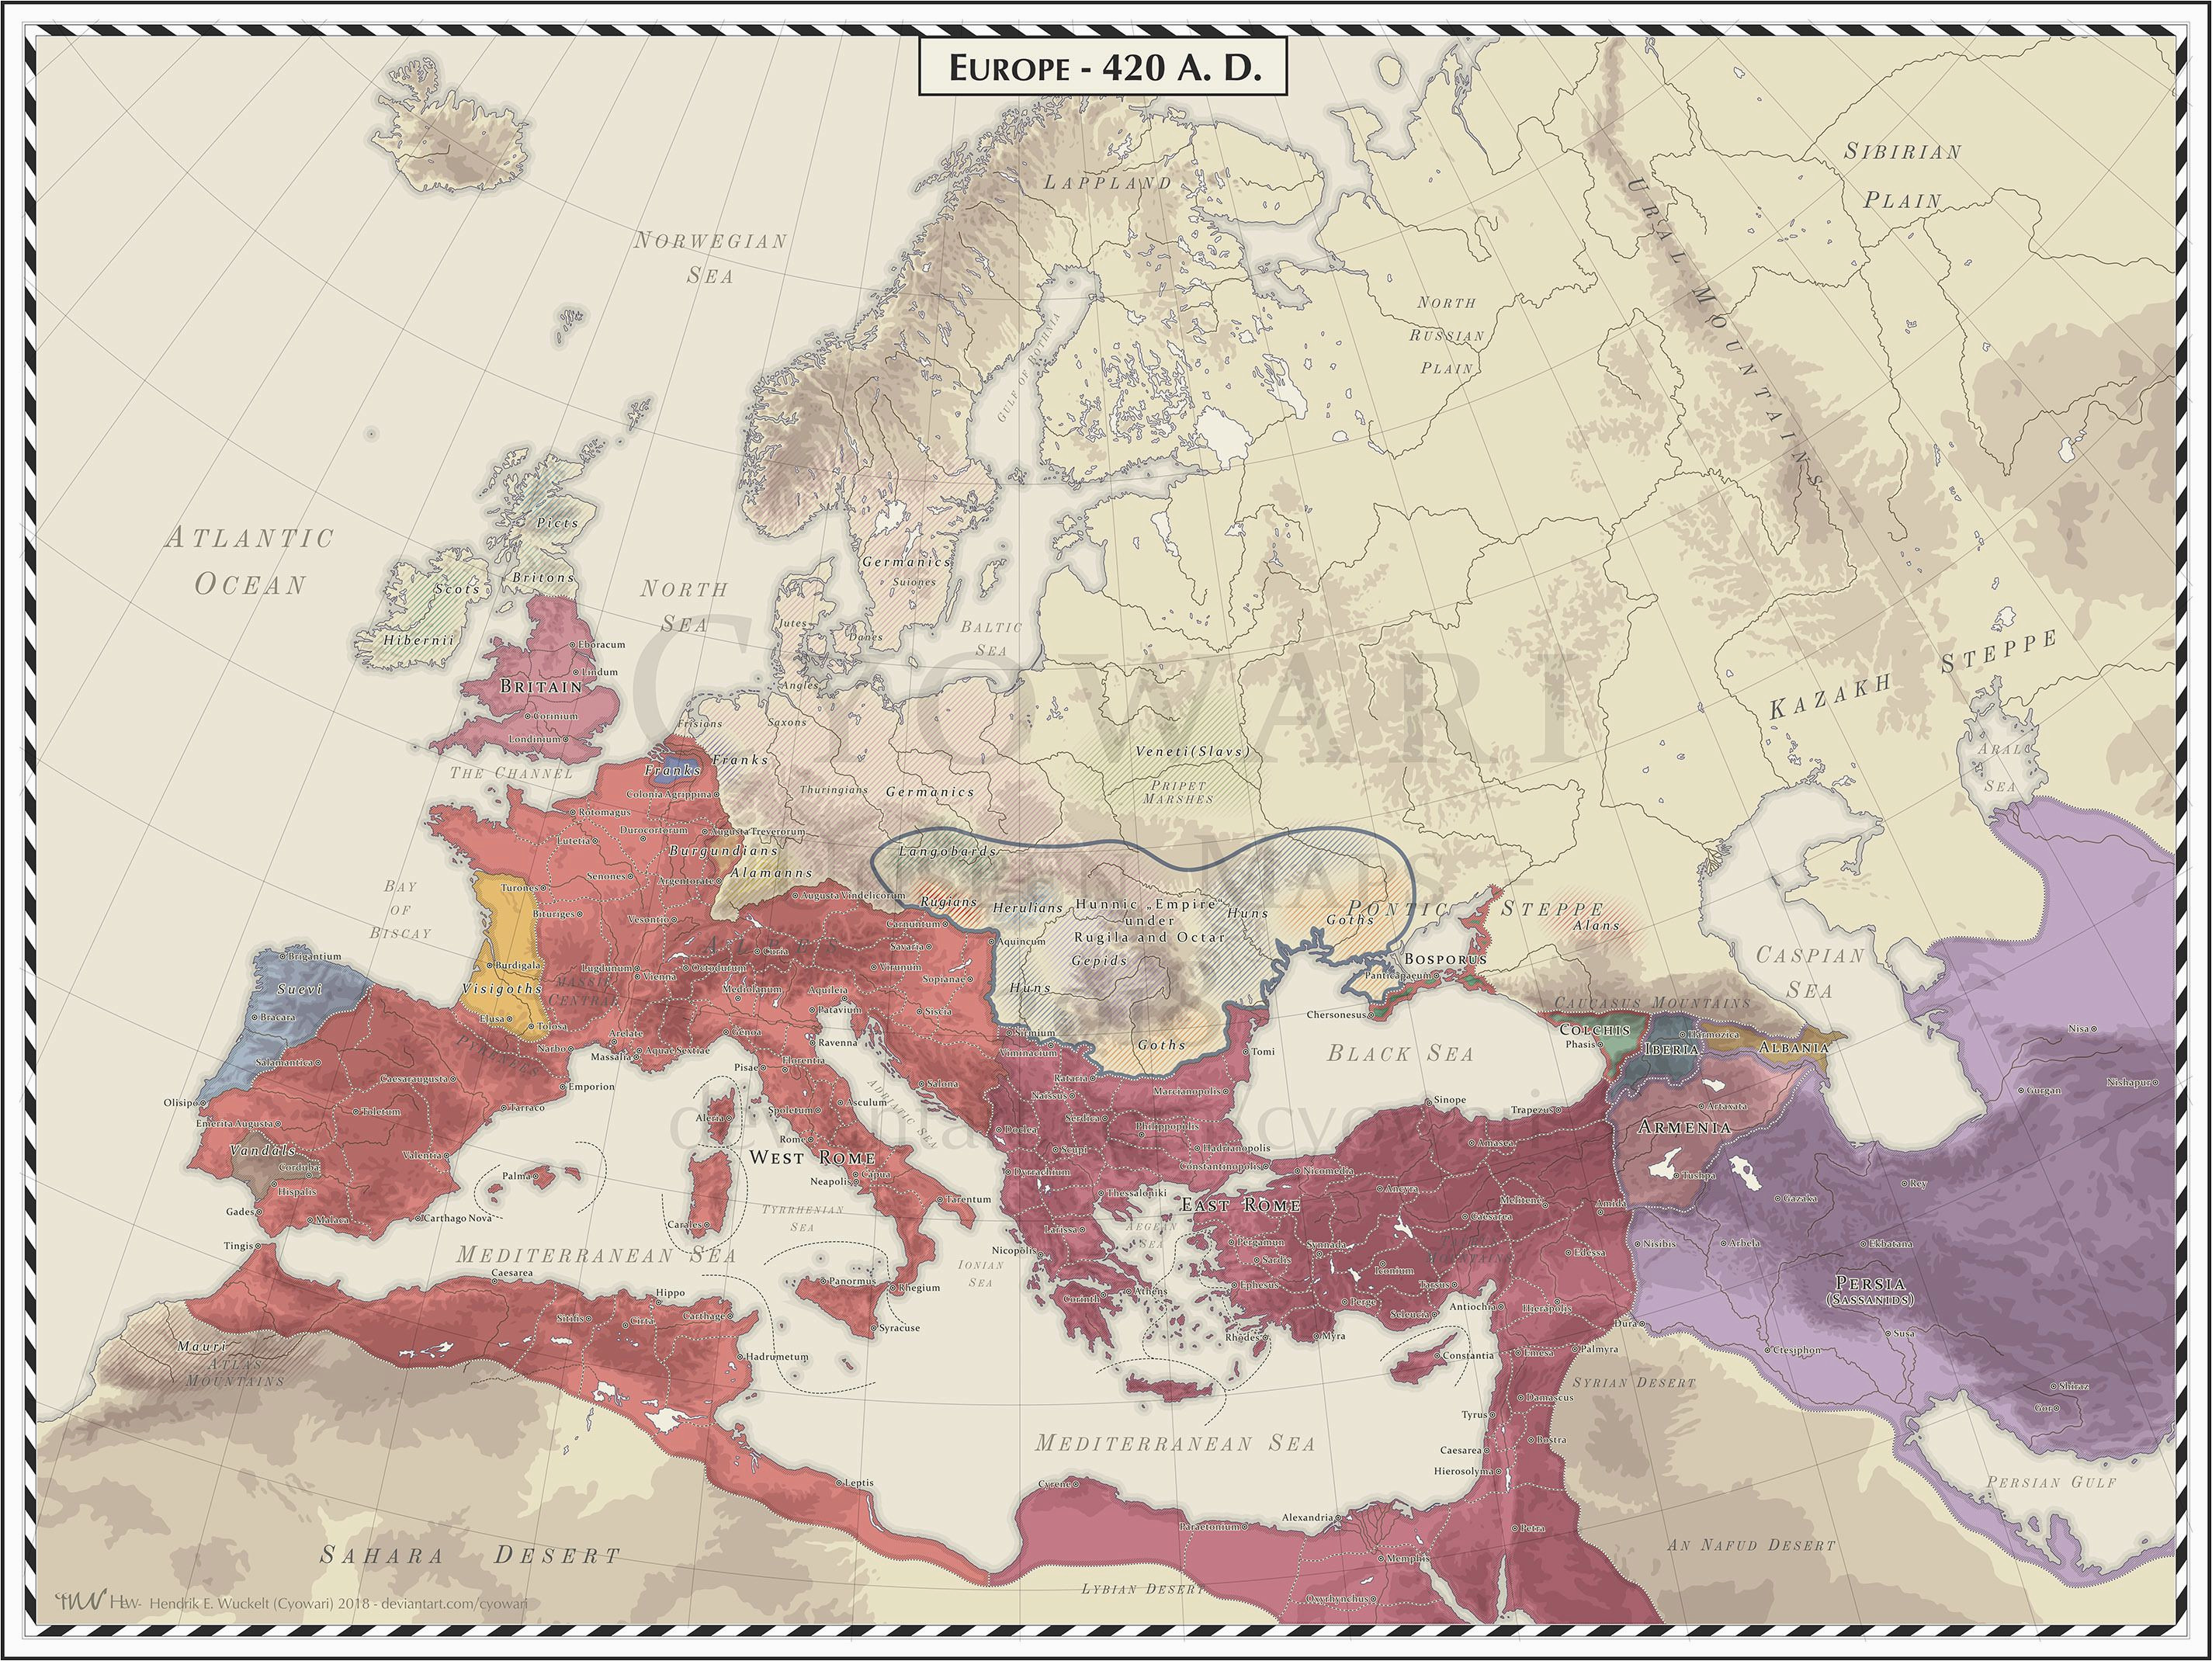 europe 420 ad maps and globes map roman empire